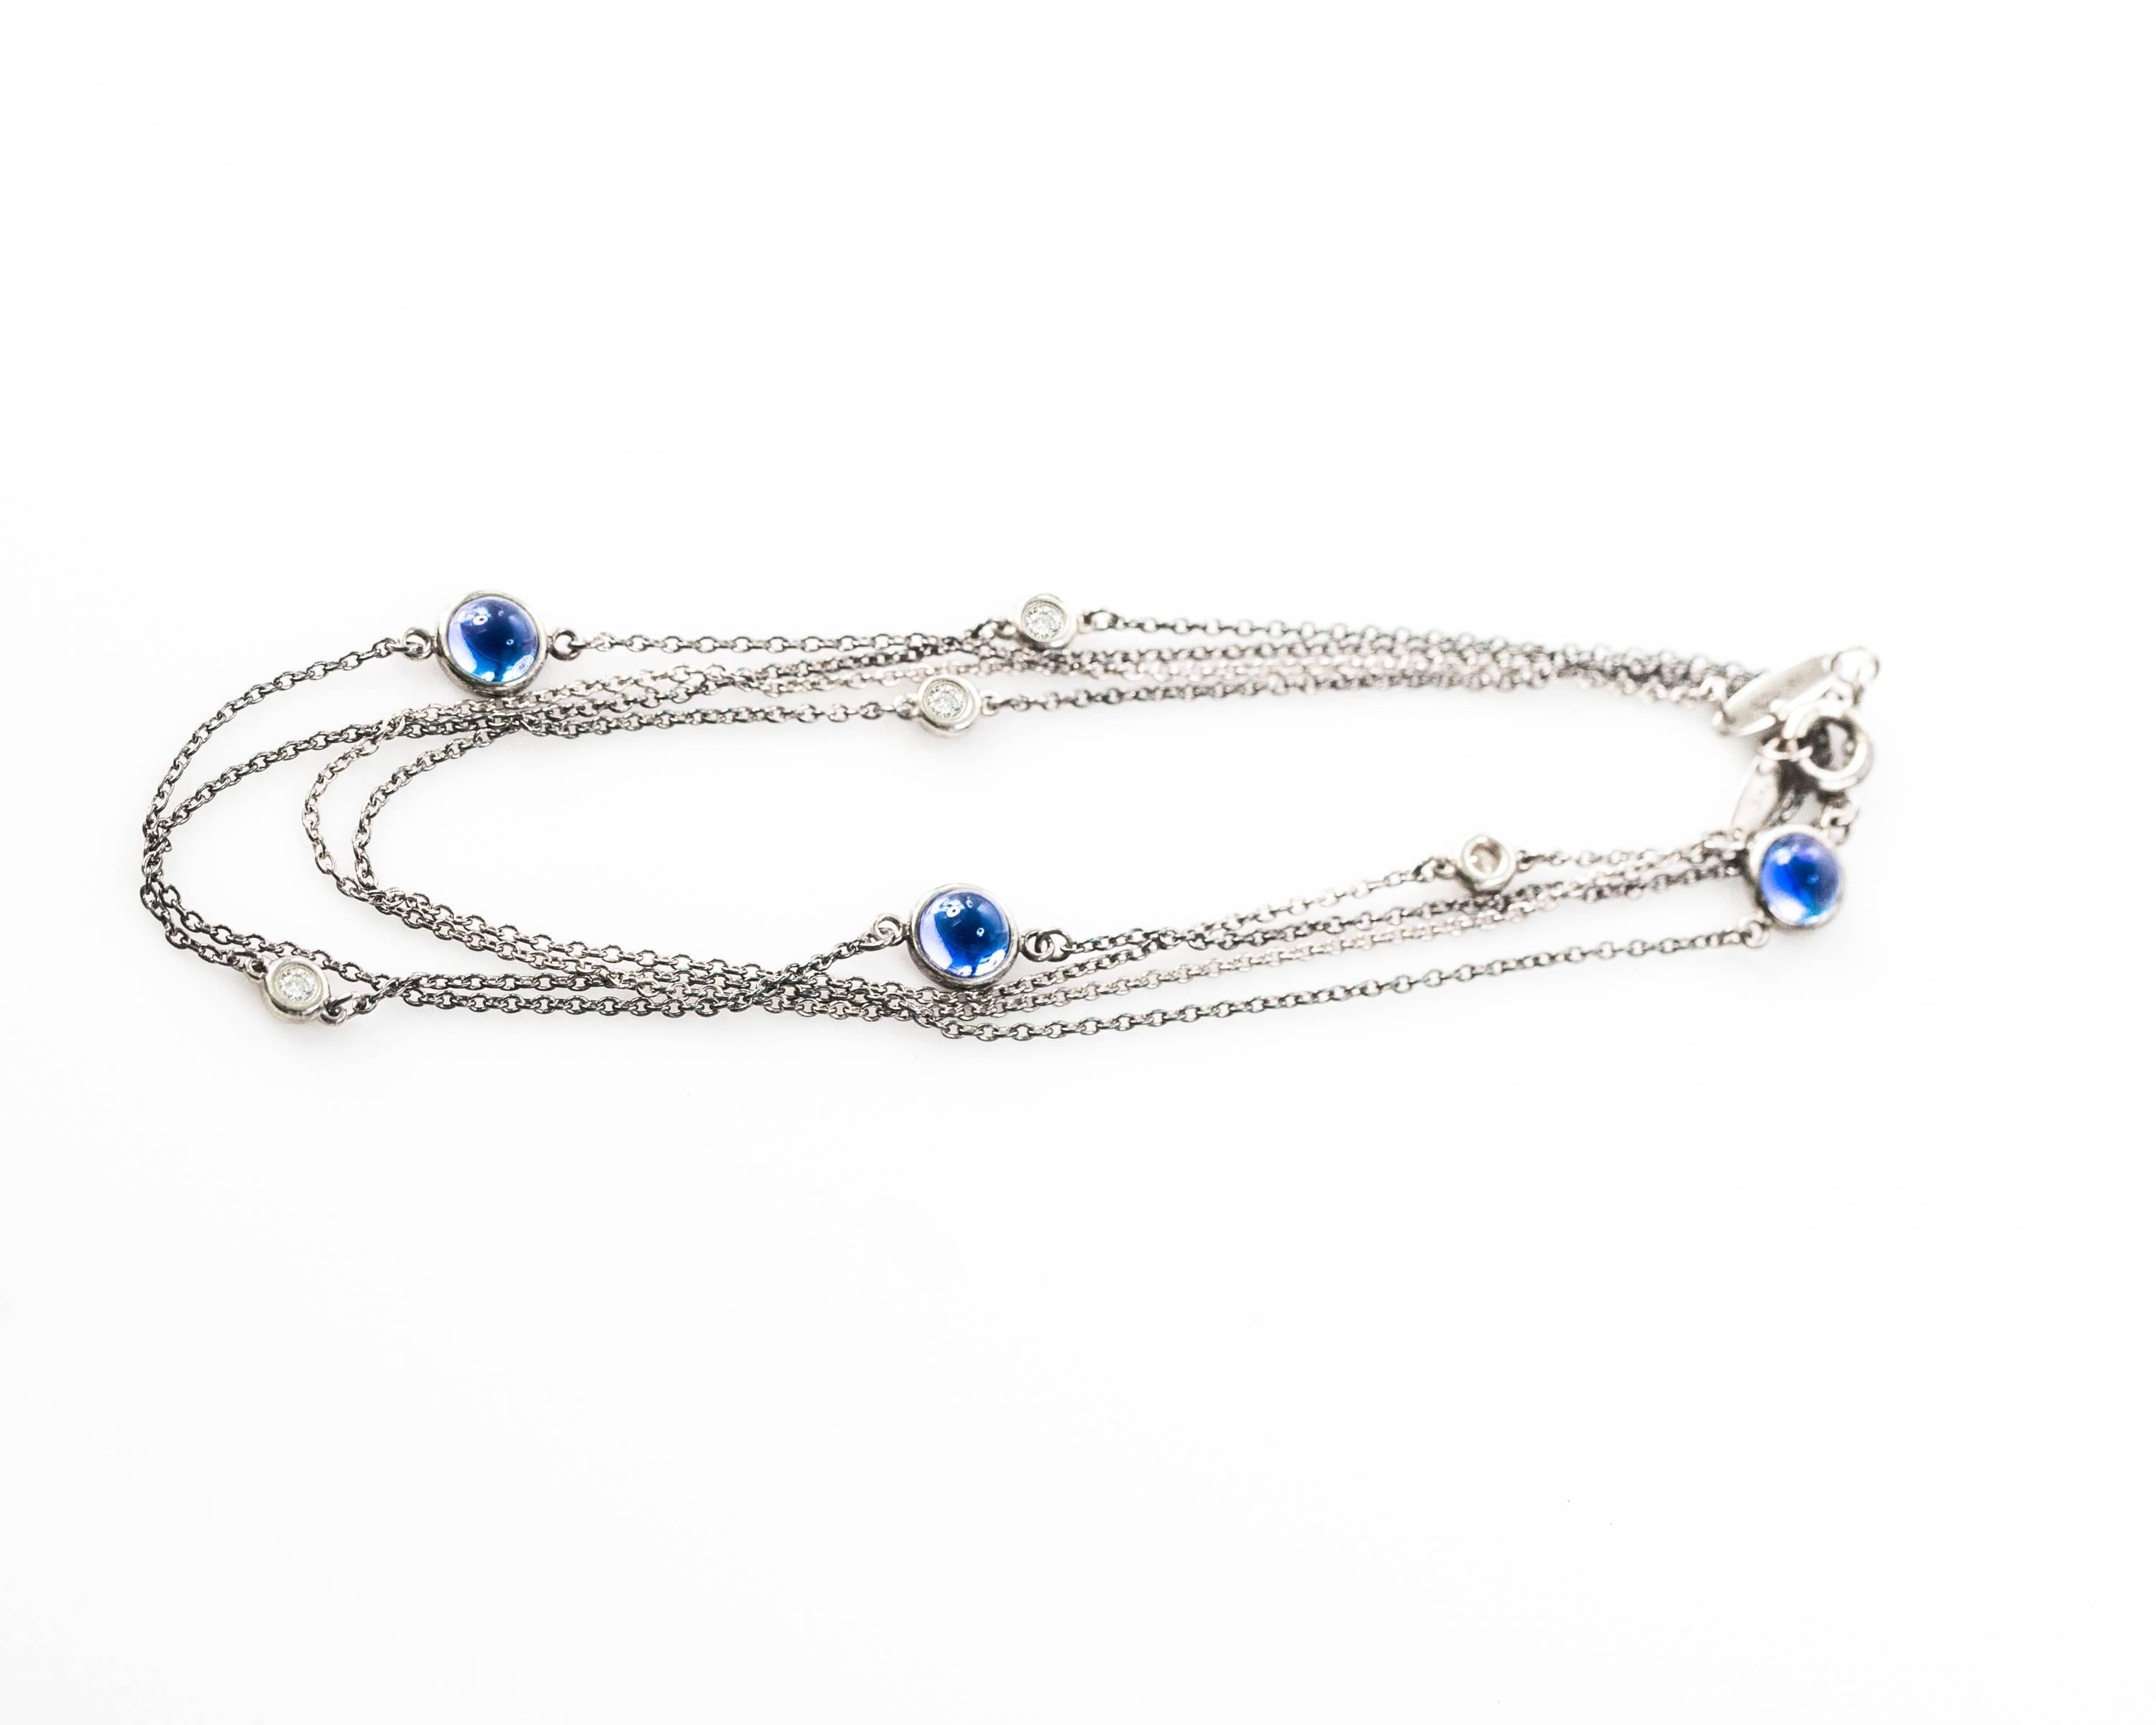 This elegant Tiffany and Co. Elsa Peretti Blue Sapphire, Diamond and Sterling Silver Diamonds by the Yard necklace features 3 bezel set blue sapphires and 4 bezel set diamonds arranged in an alternating pattern along the Sterling Silver chain. You